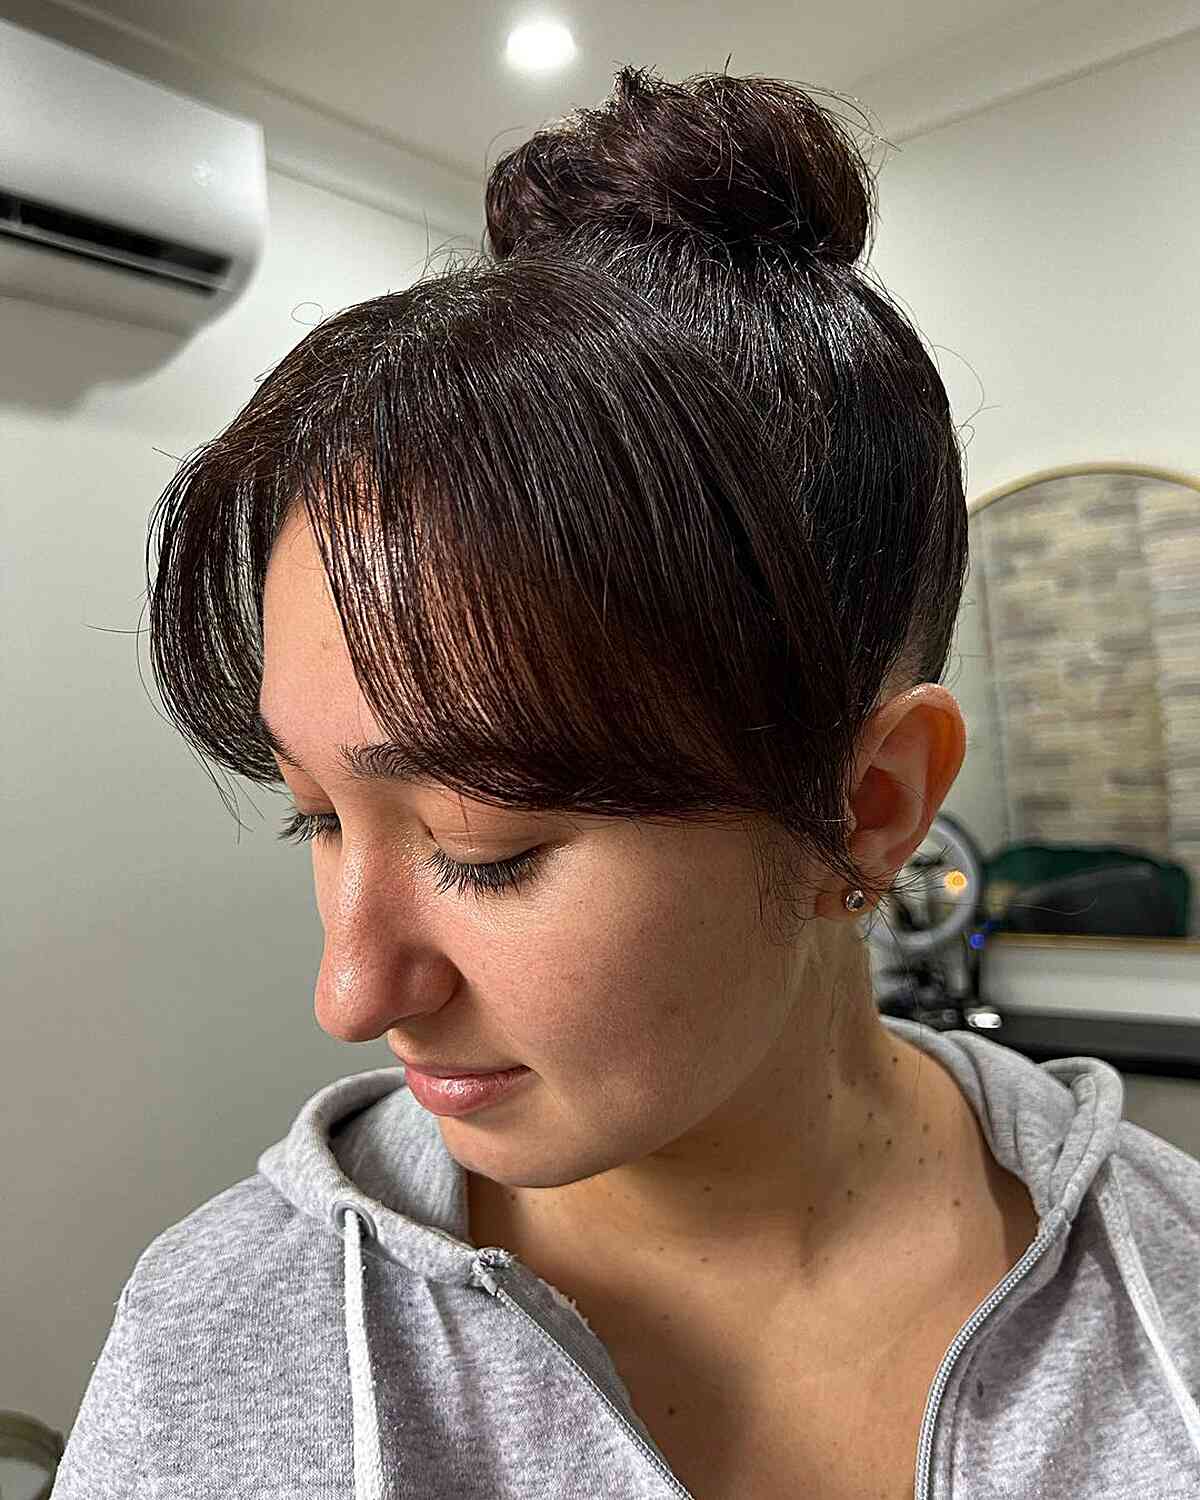 Top Knot Bun Updo with Middle Part Bangs